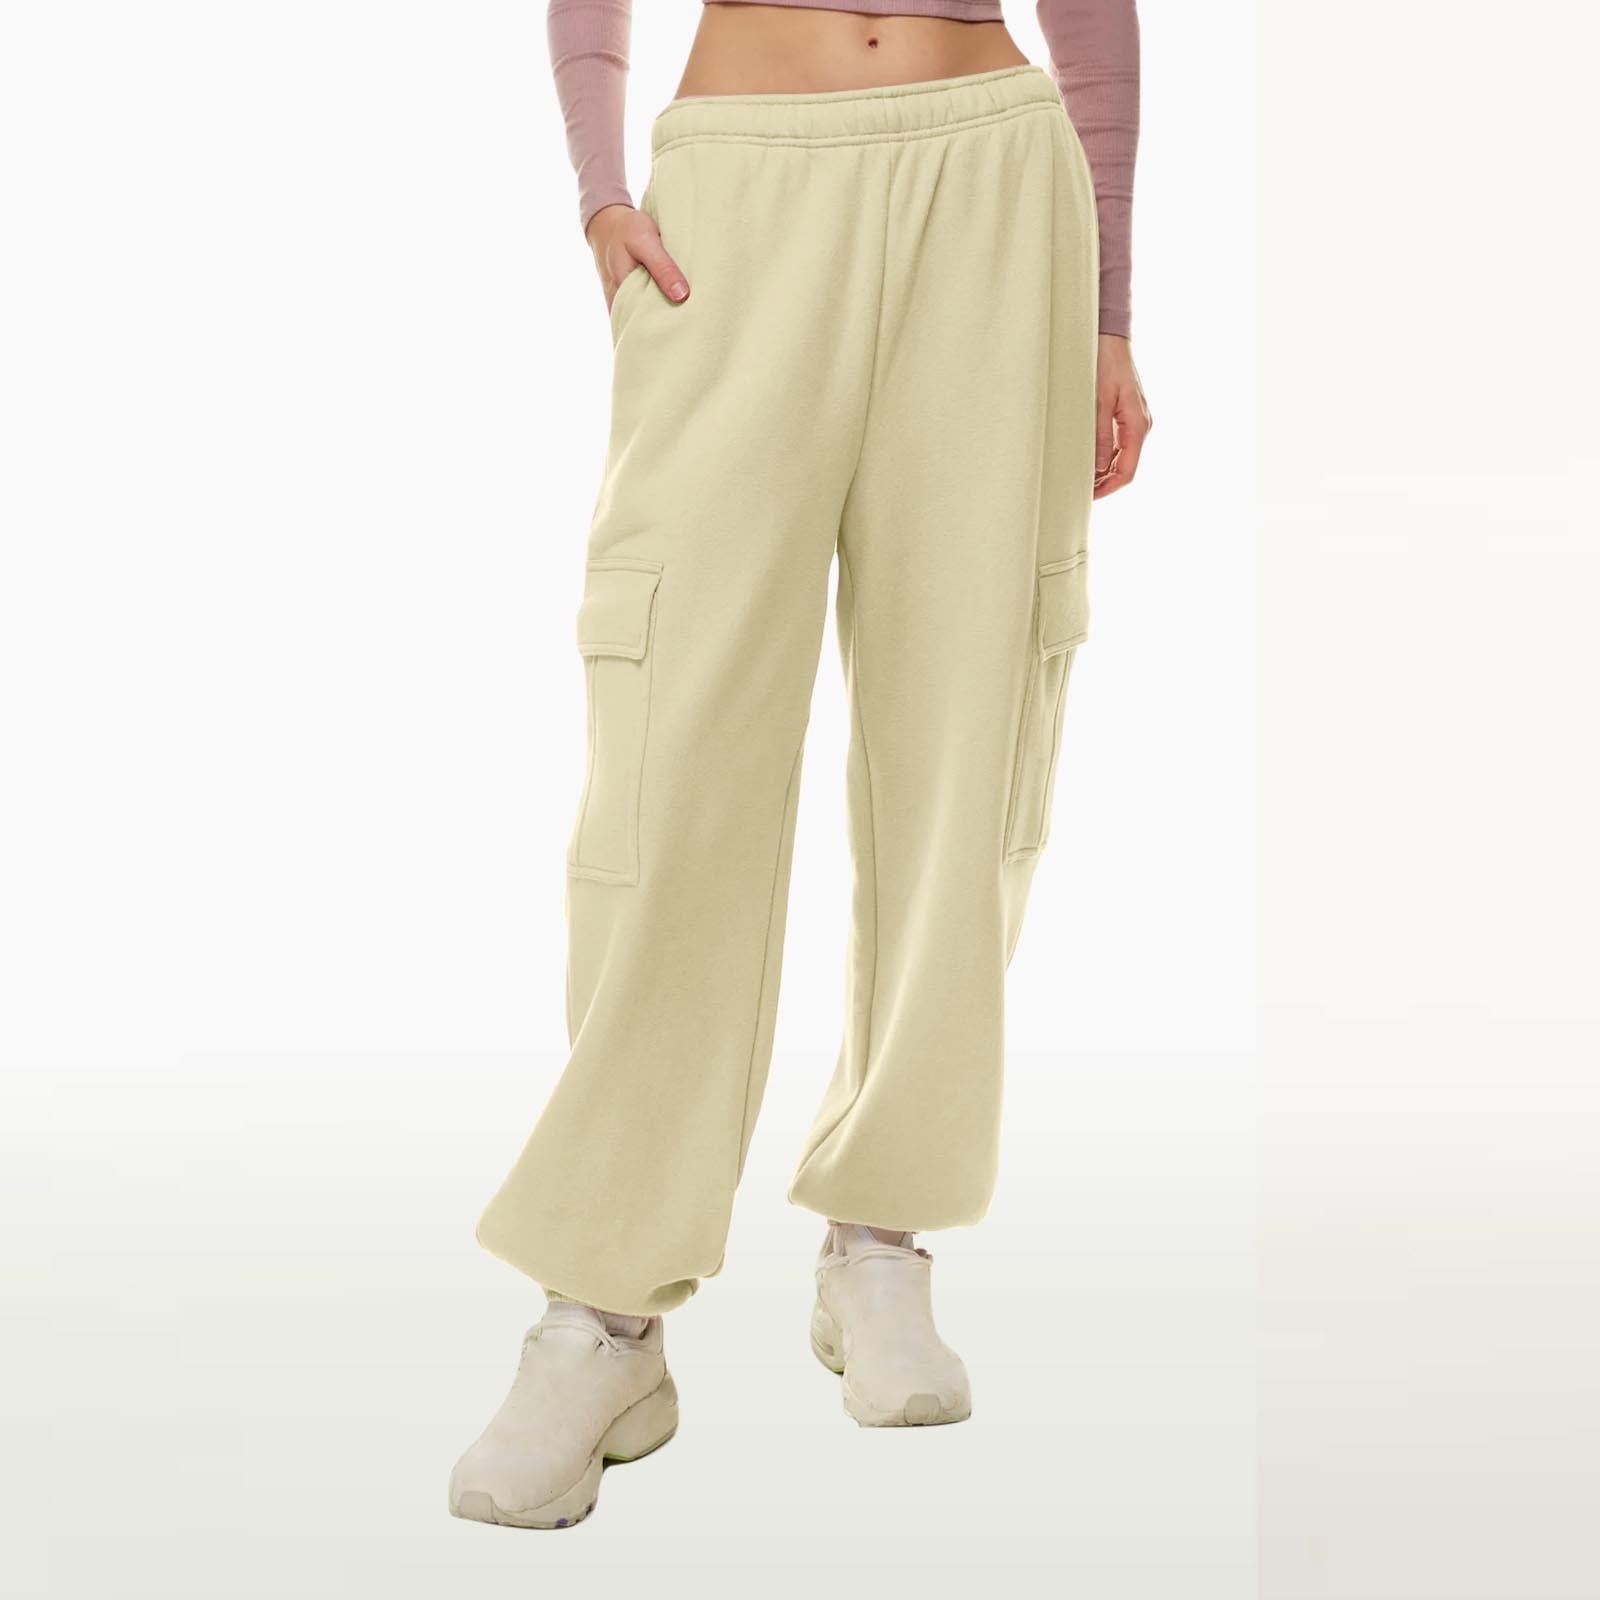 Cargo sweatpants for women long Casual Trousers High Waist Drawstring With  Multi-Pockets Long Pants jogger pants work pants for women Khaki XL